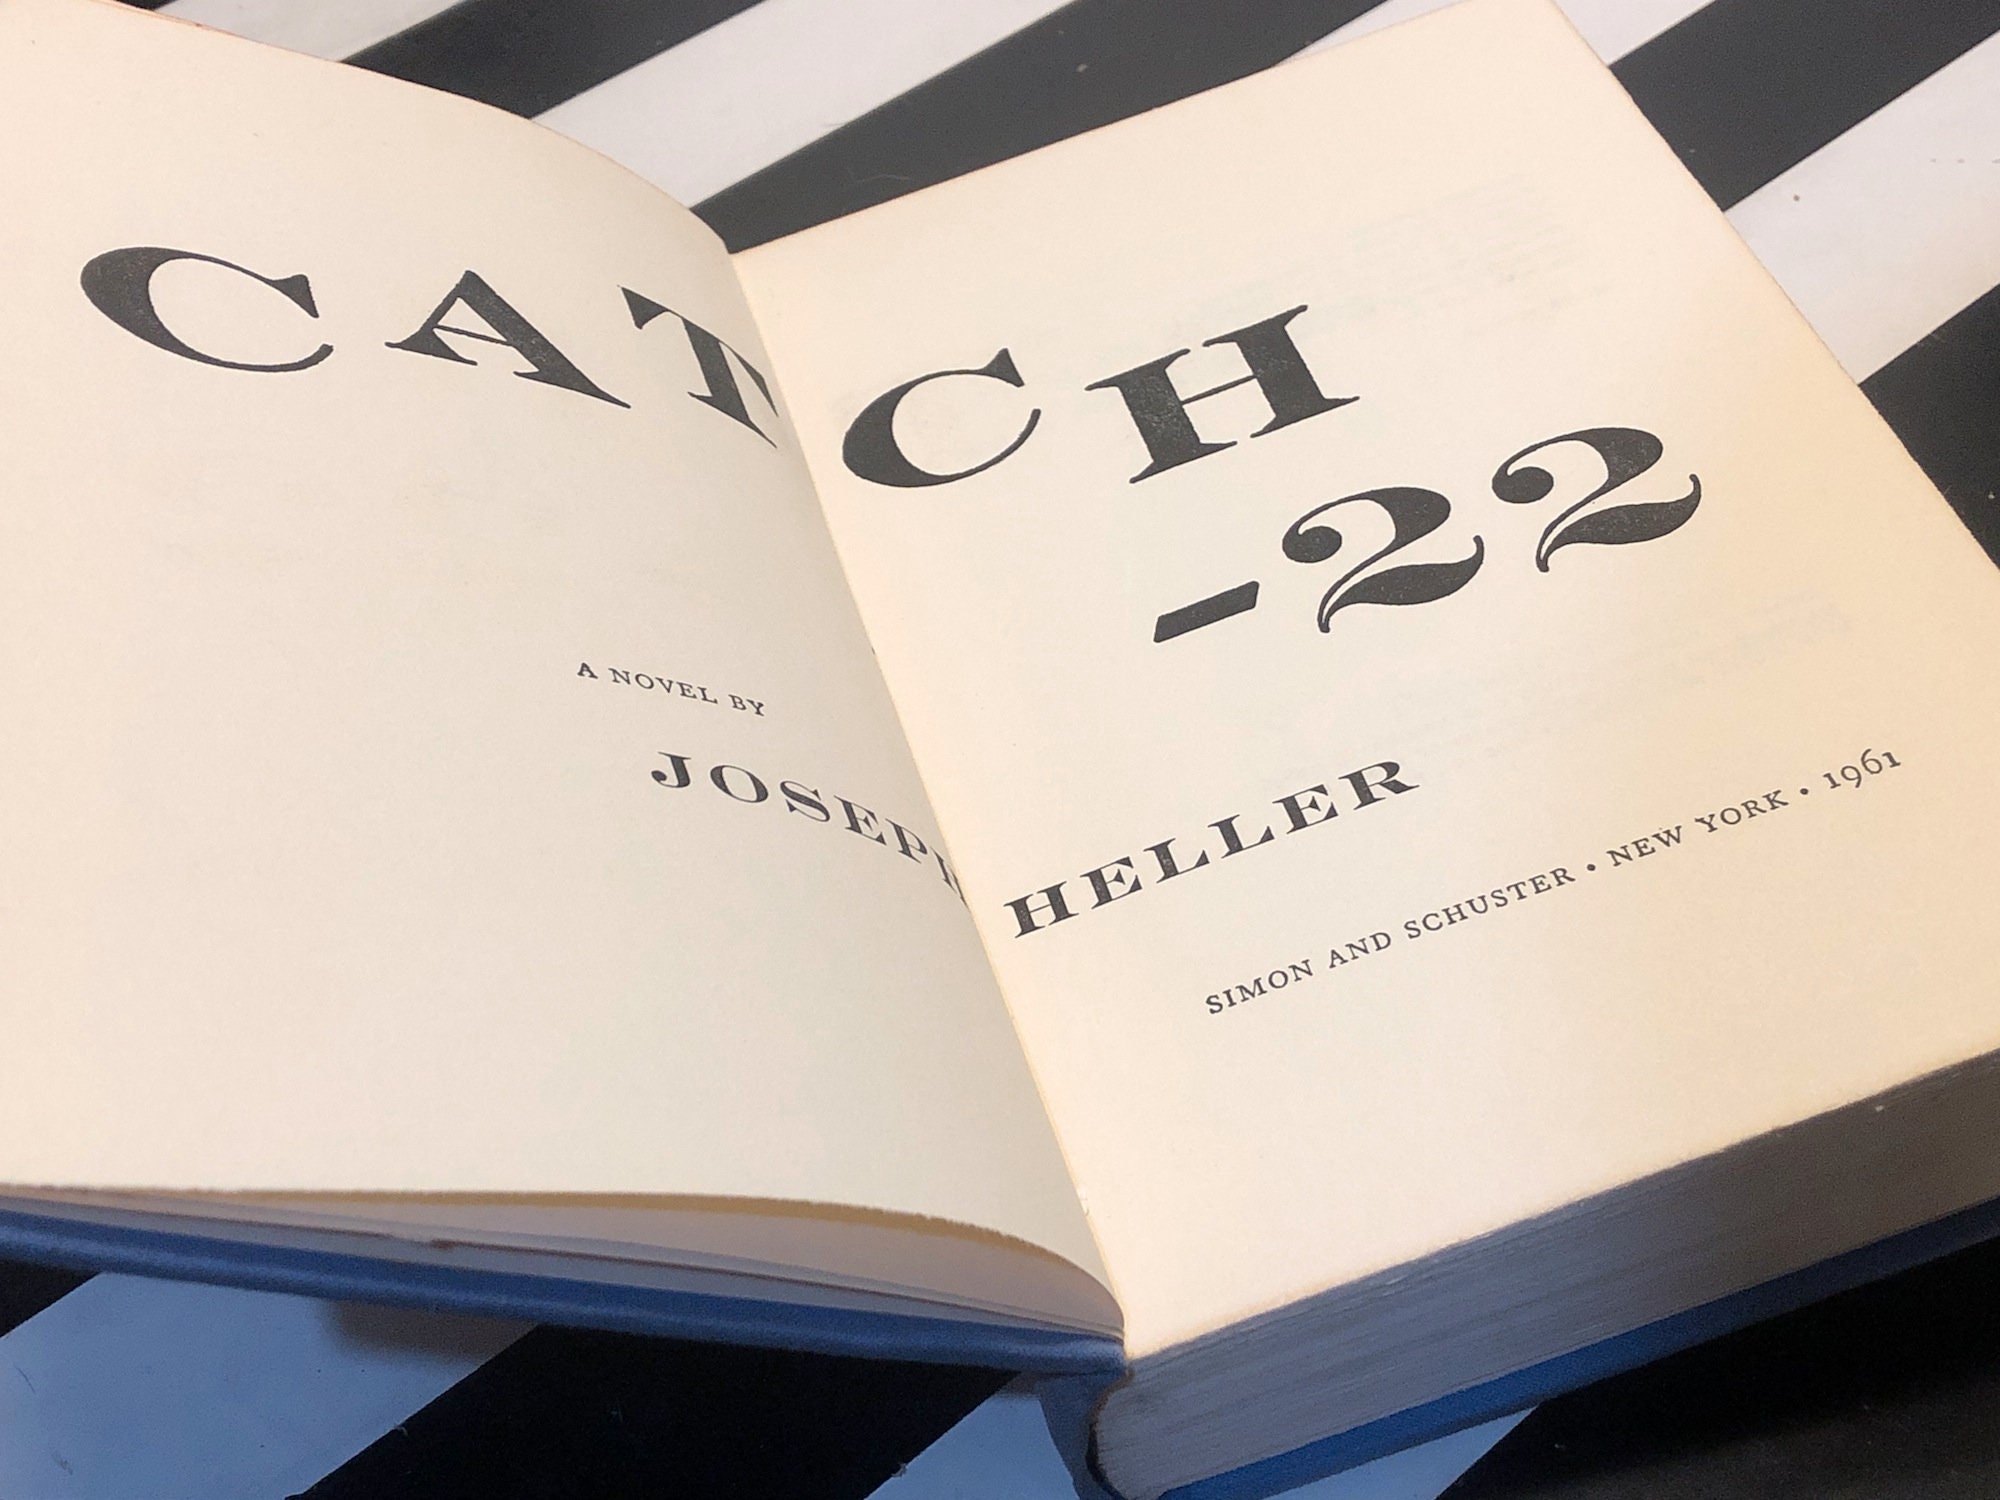 book review on catch 22